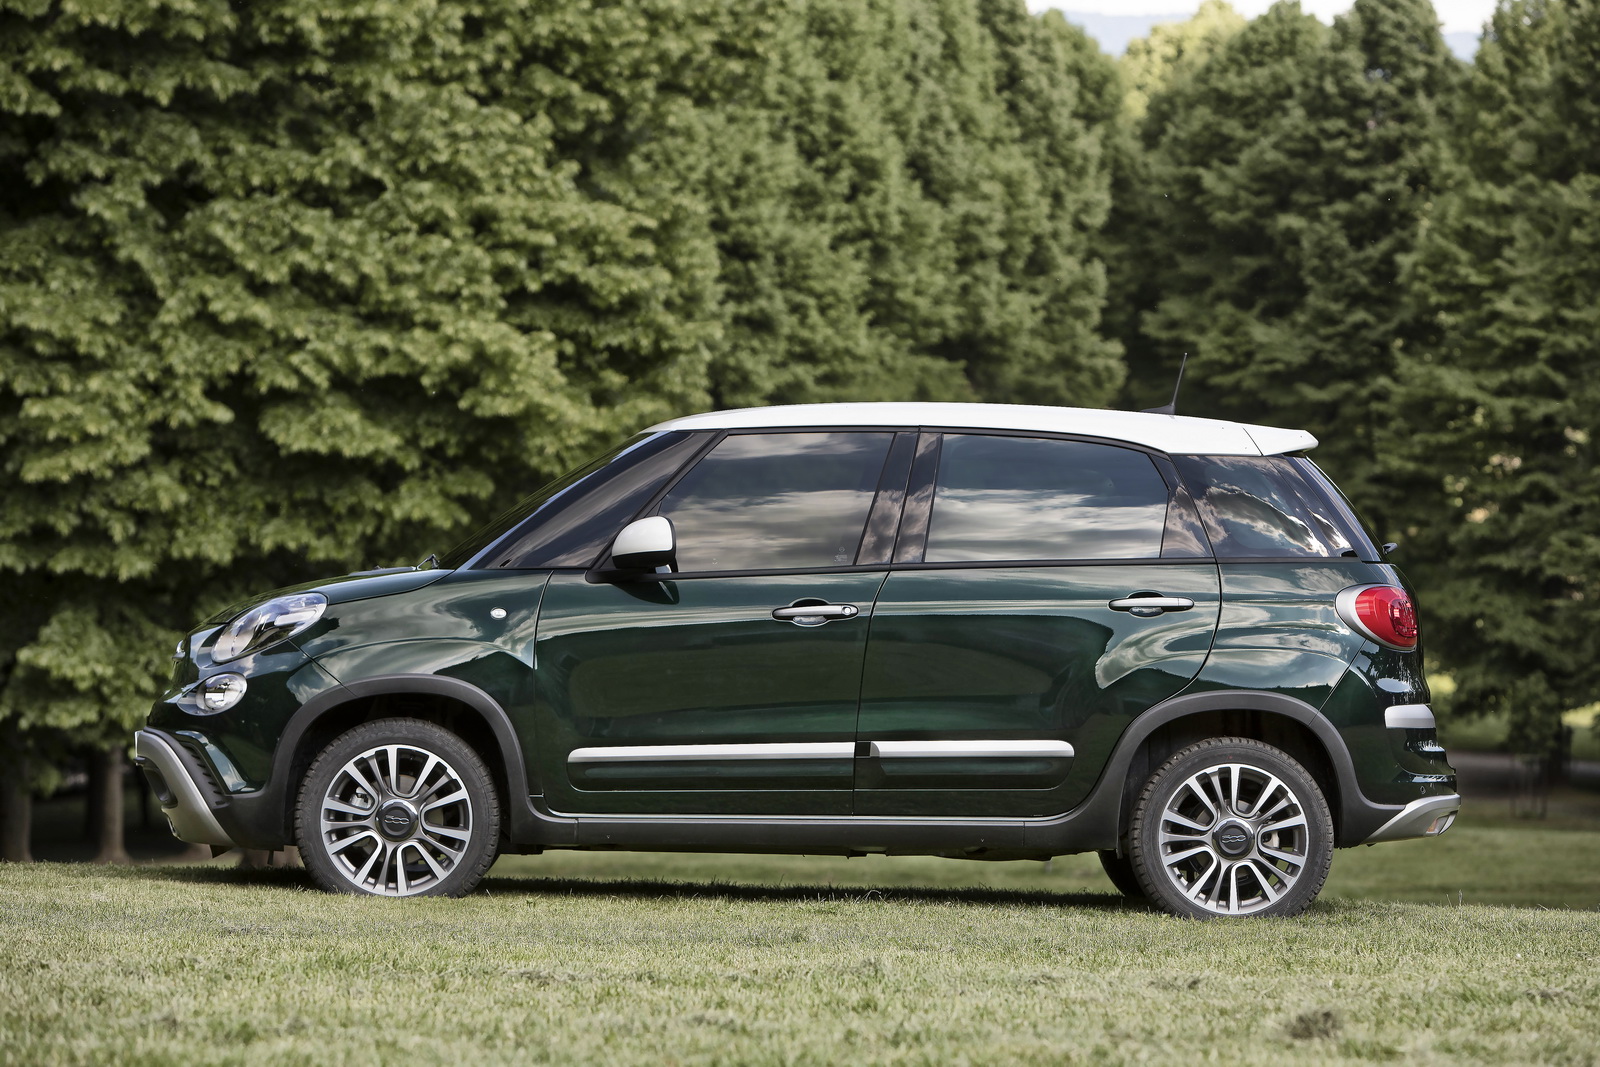 Fiat Updates 2017 500L With 40 Percent New Parts And Three Distinct Flavors Carscoops